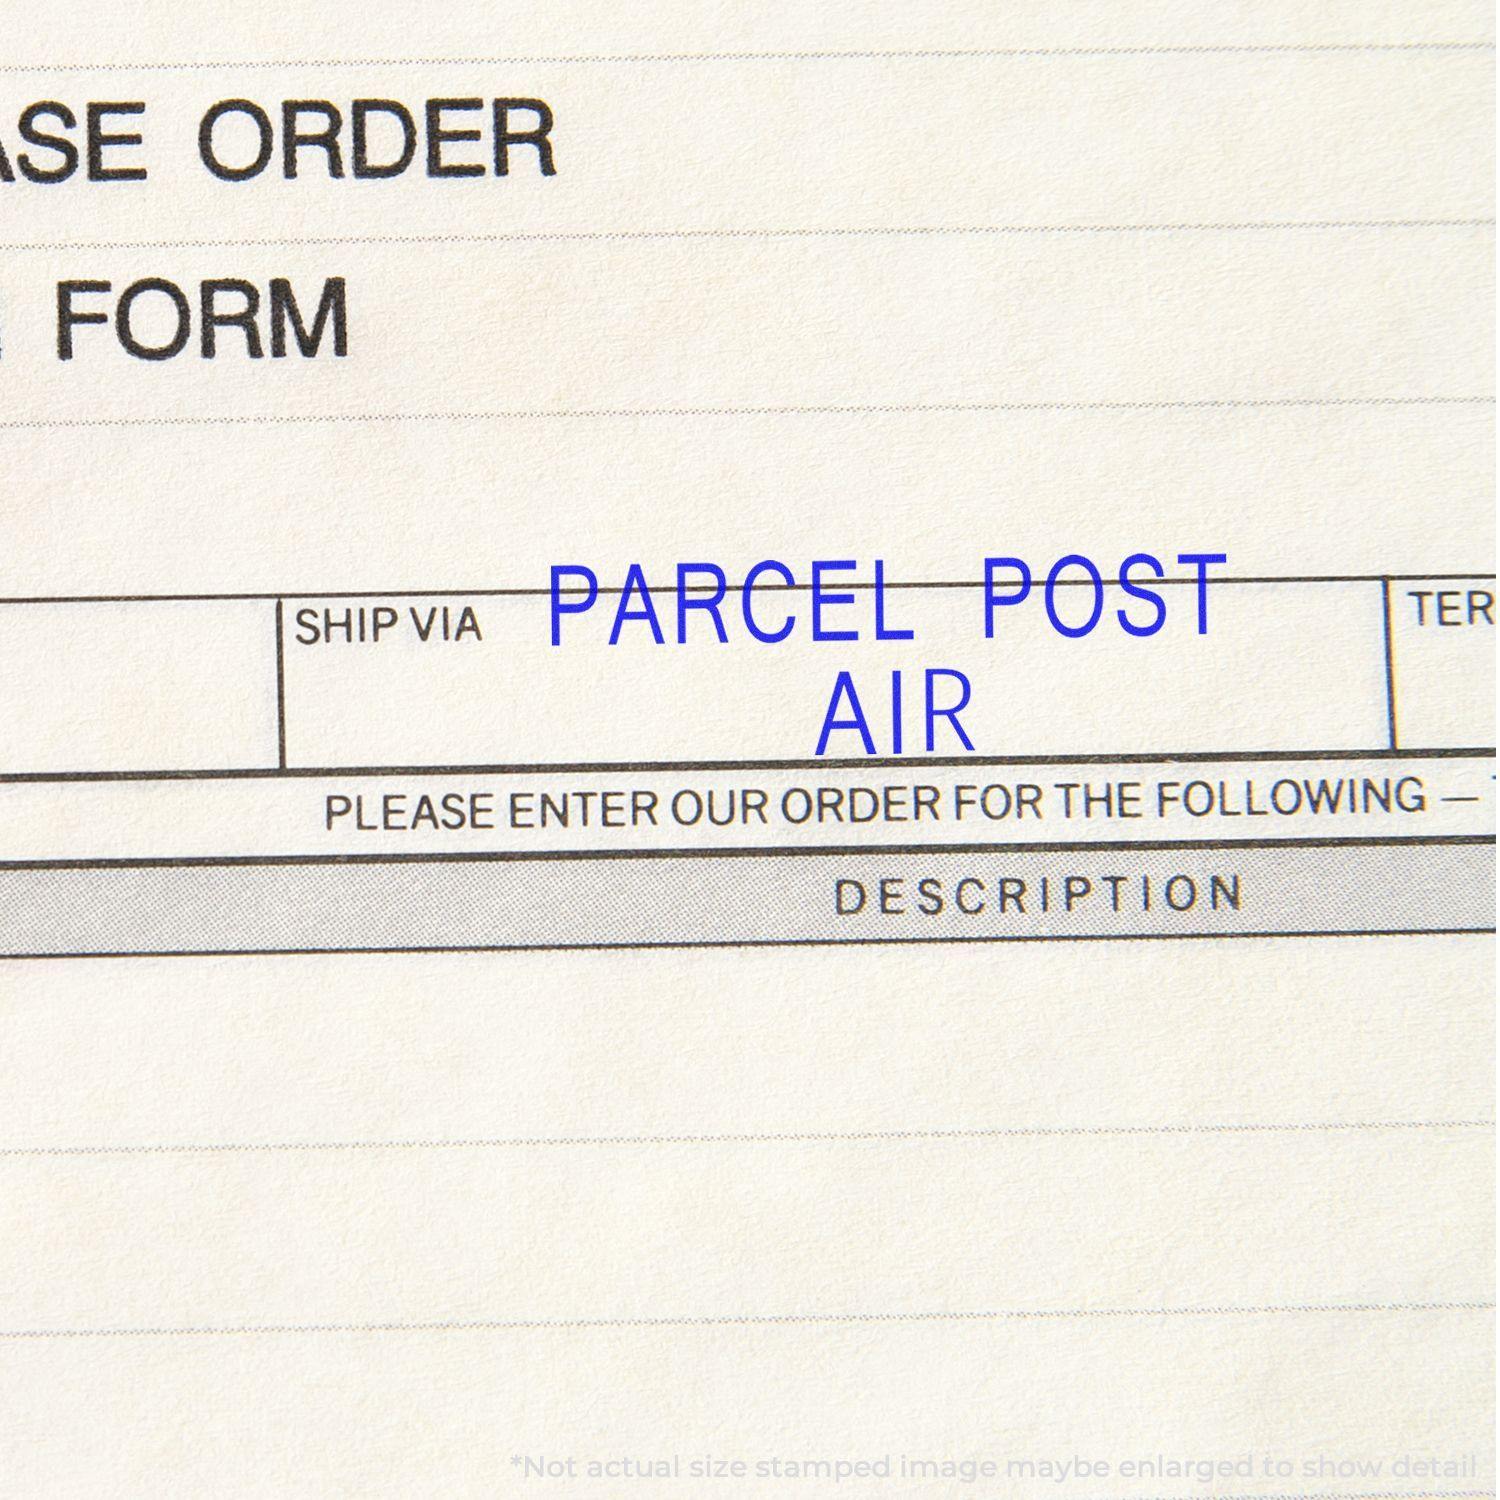 A stock office rubber stamp with a stamped image showing how the text "PARCEL POST AIR" in a large font is displayed after stamping.